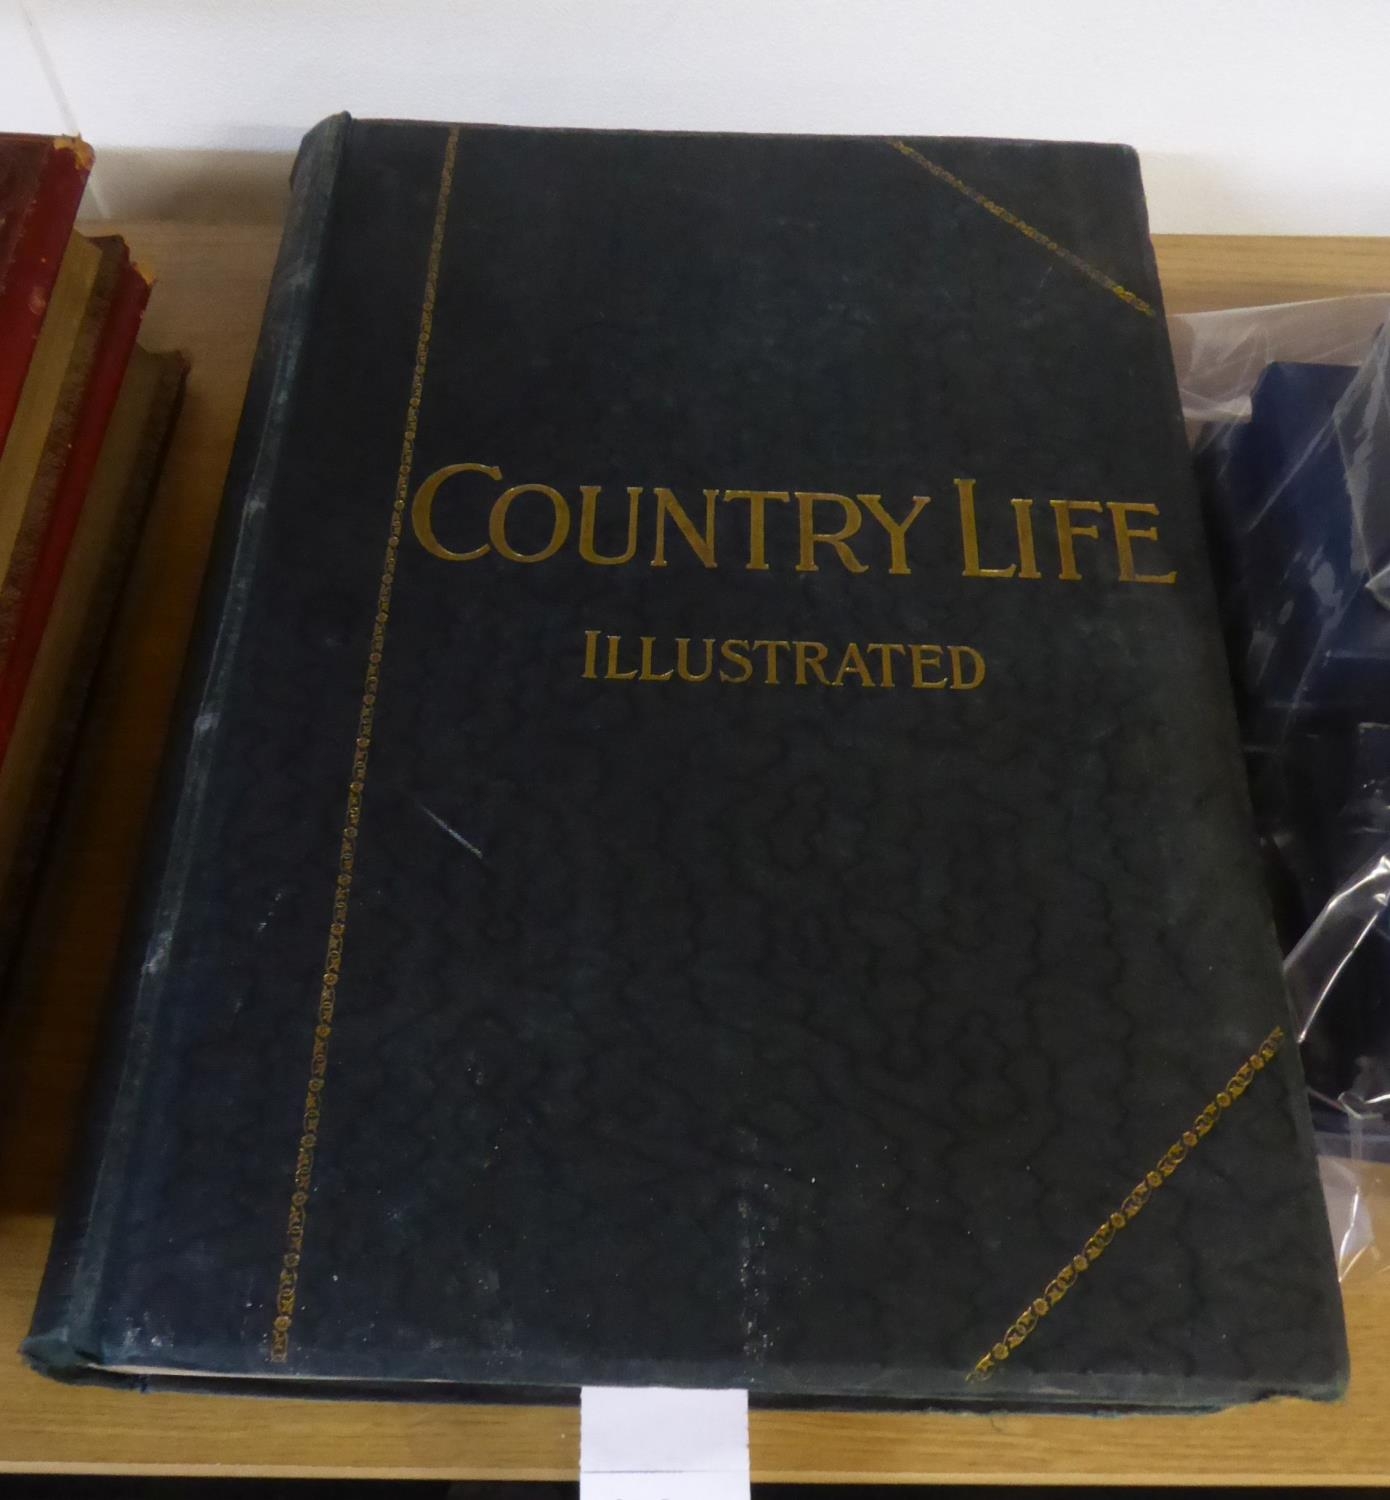 COUNTRY LIFE ILLUSTRATED magazine, The Journal for all interested in Country Life and Country - Image 2 of 6